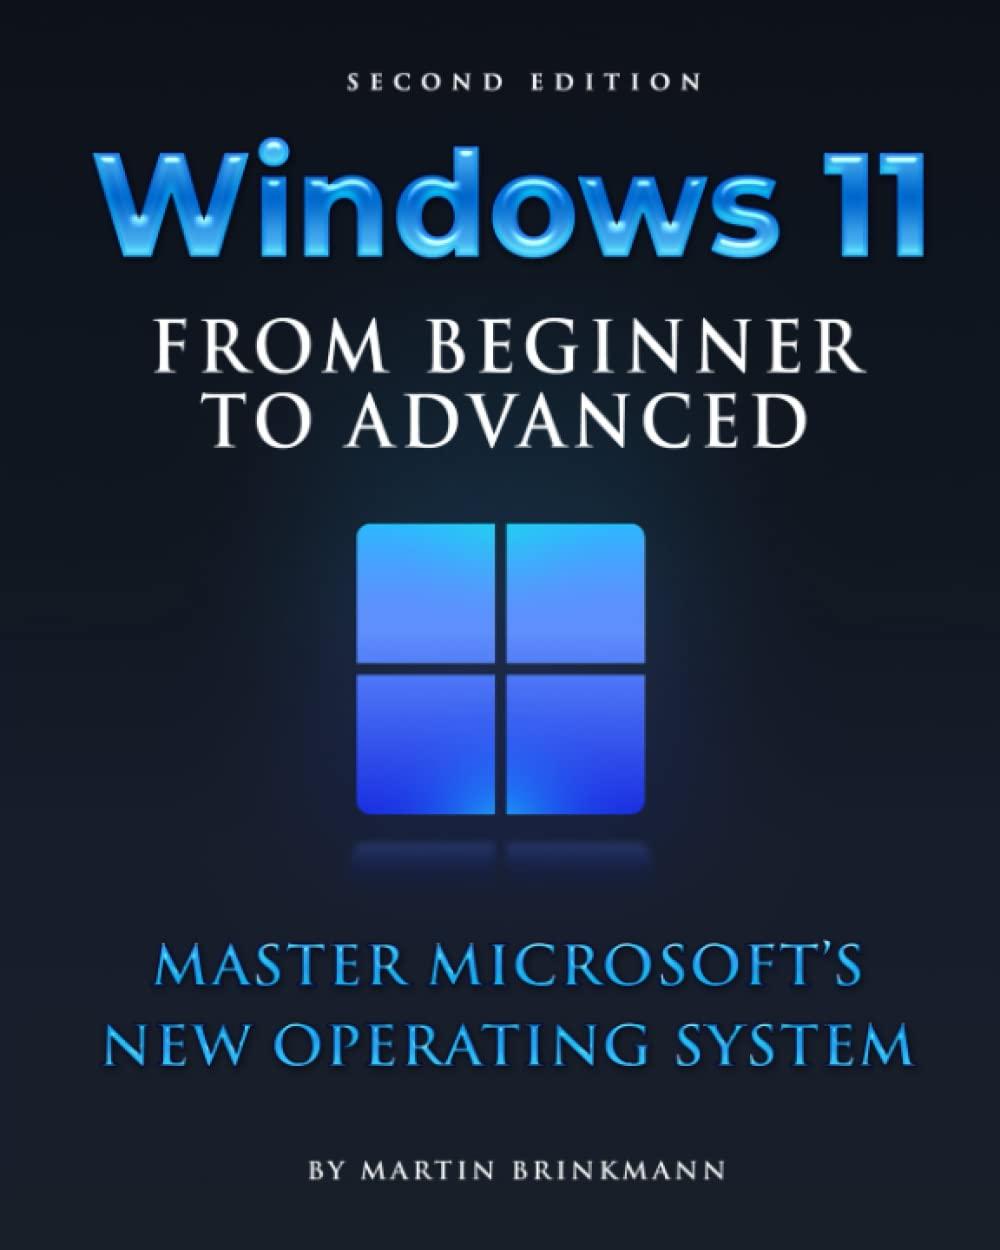 windows 11 from beginner to advanced master microsoft’s new operating system 2nd edition martin brinkmann